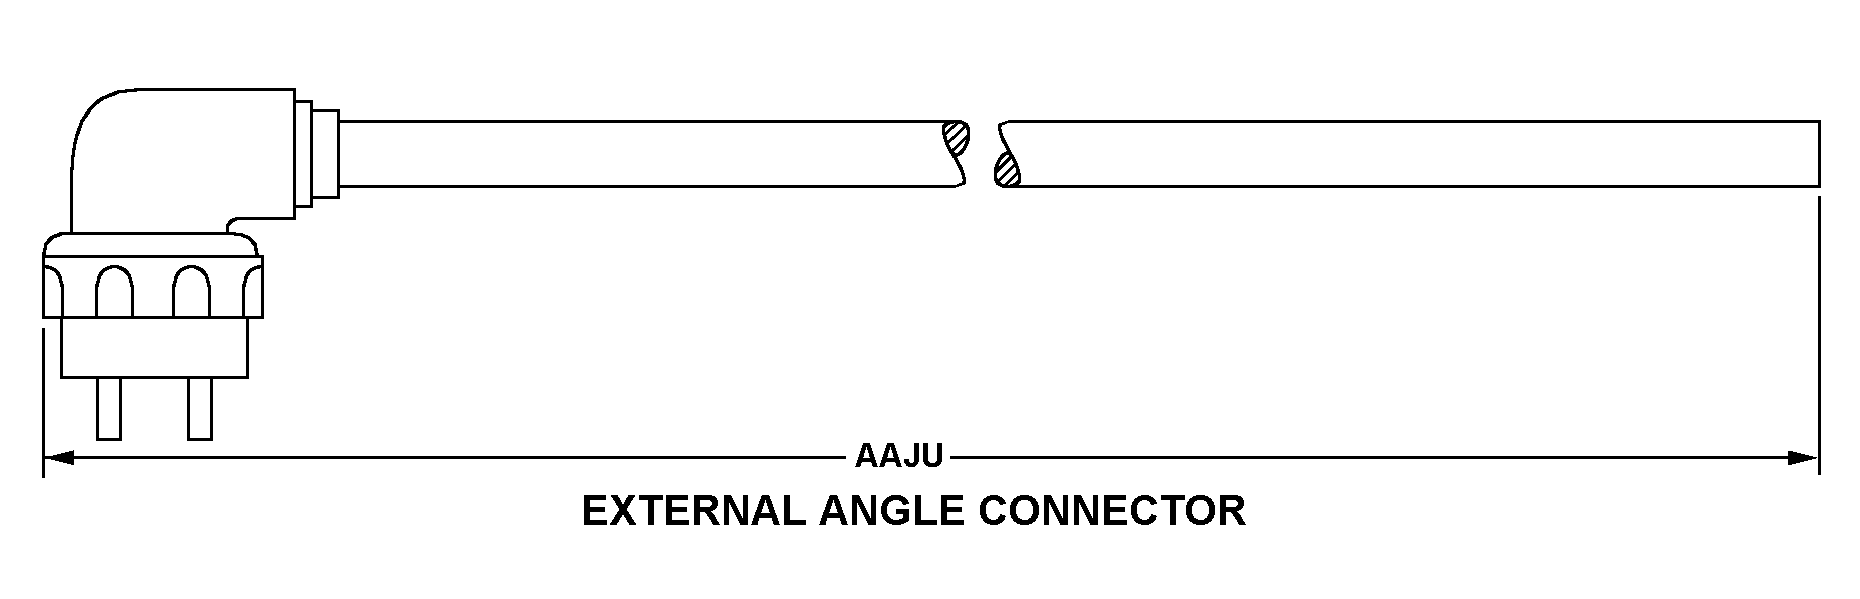 EXTERNAL ANGLE CONNECTOR style nsn 6150-01-575-2335